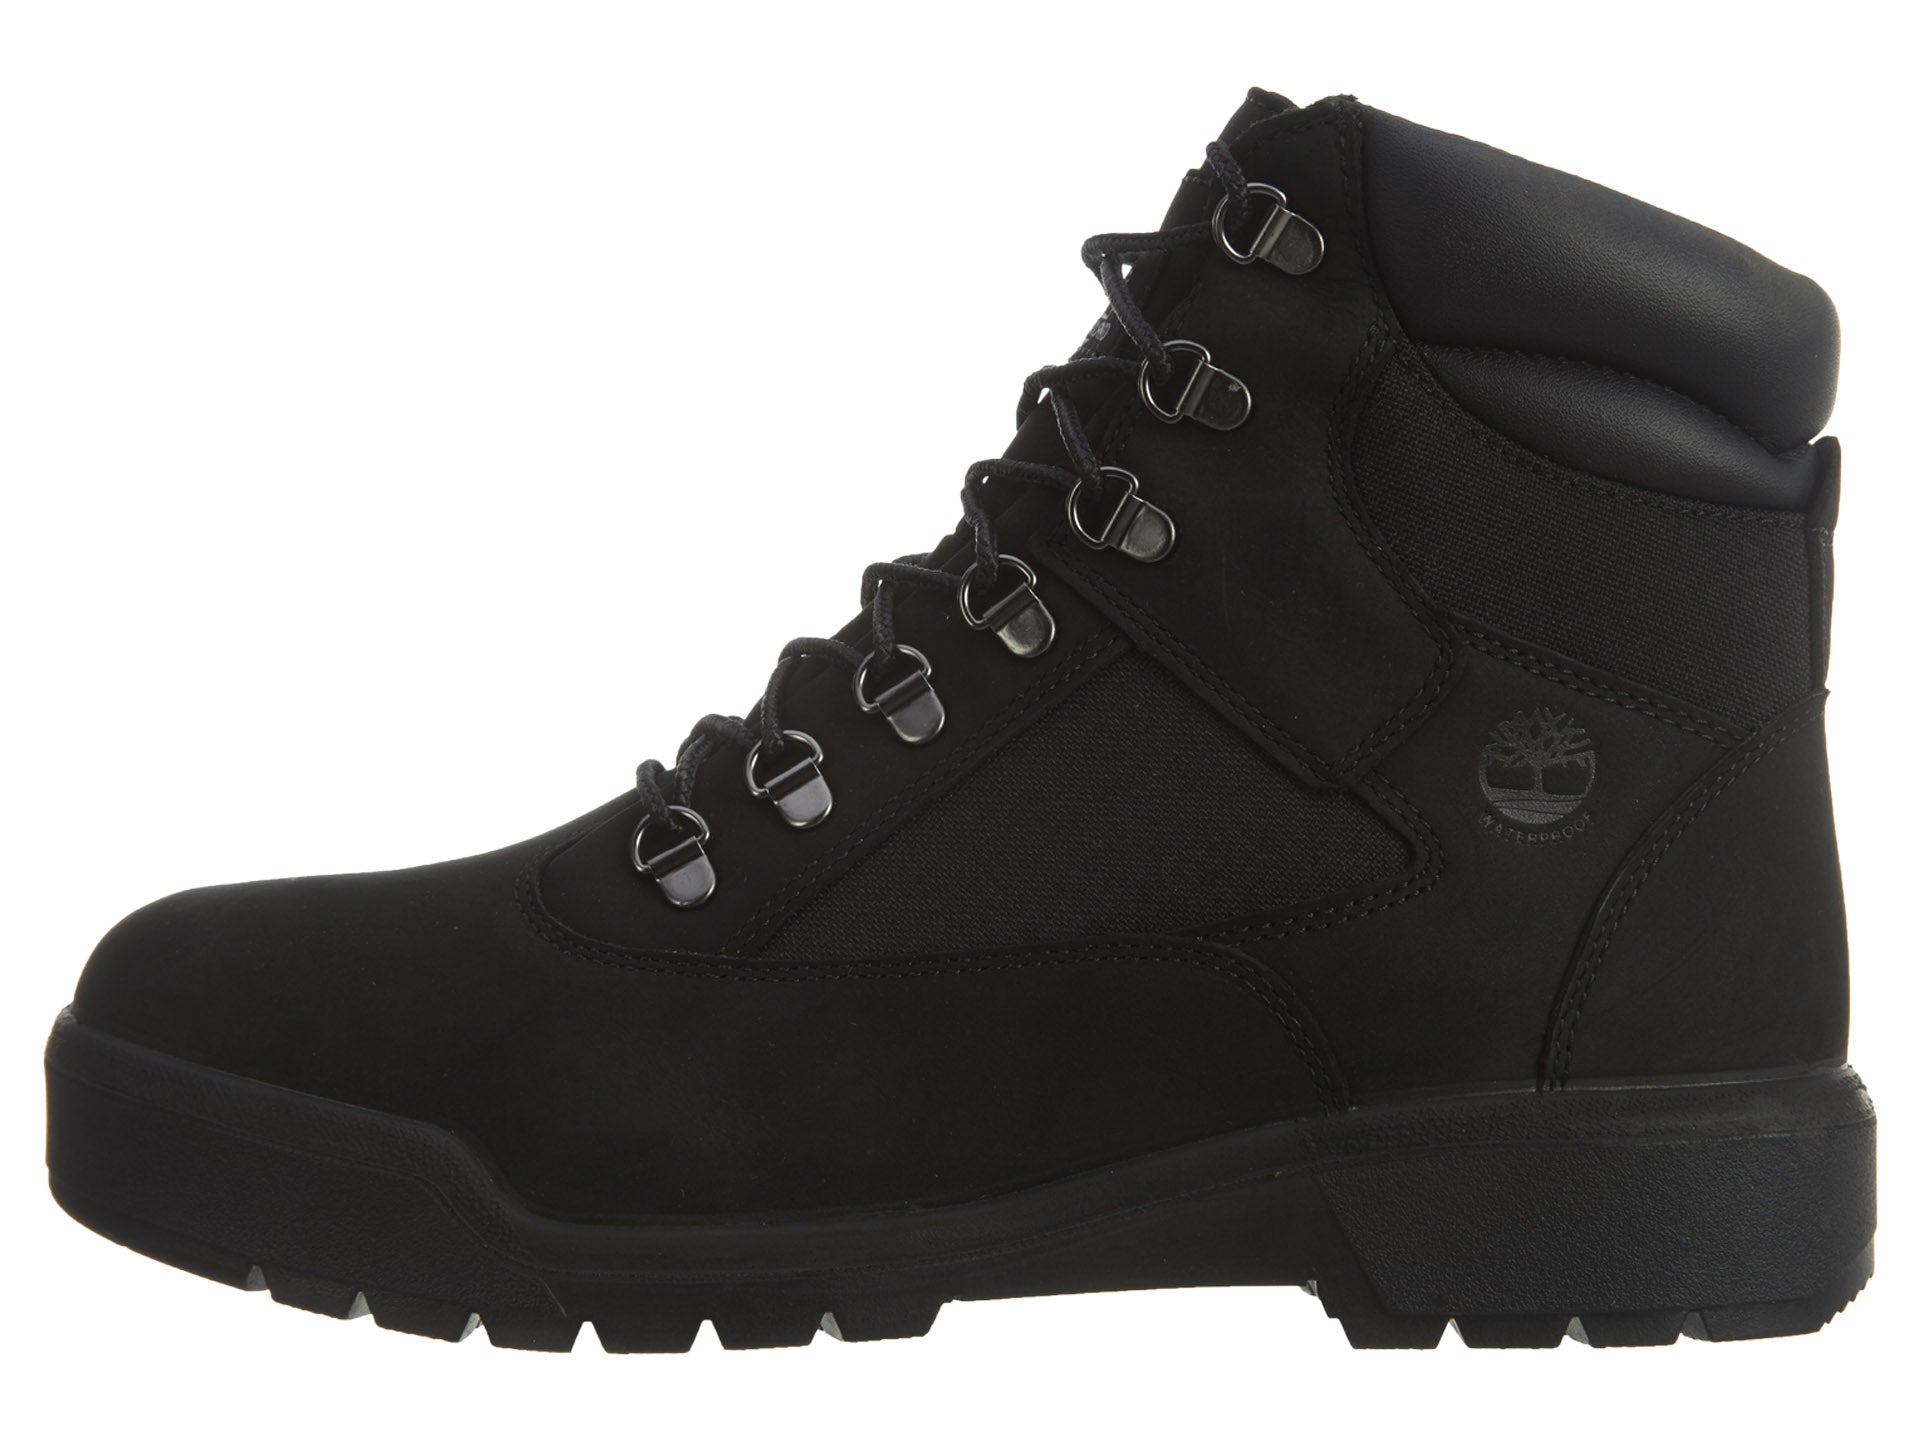 Timberland 6" Field Boots Mens Style : Tb0a17kc